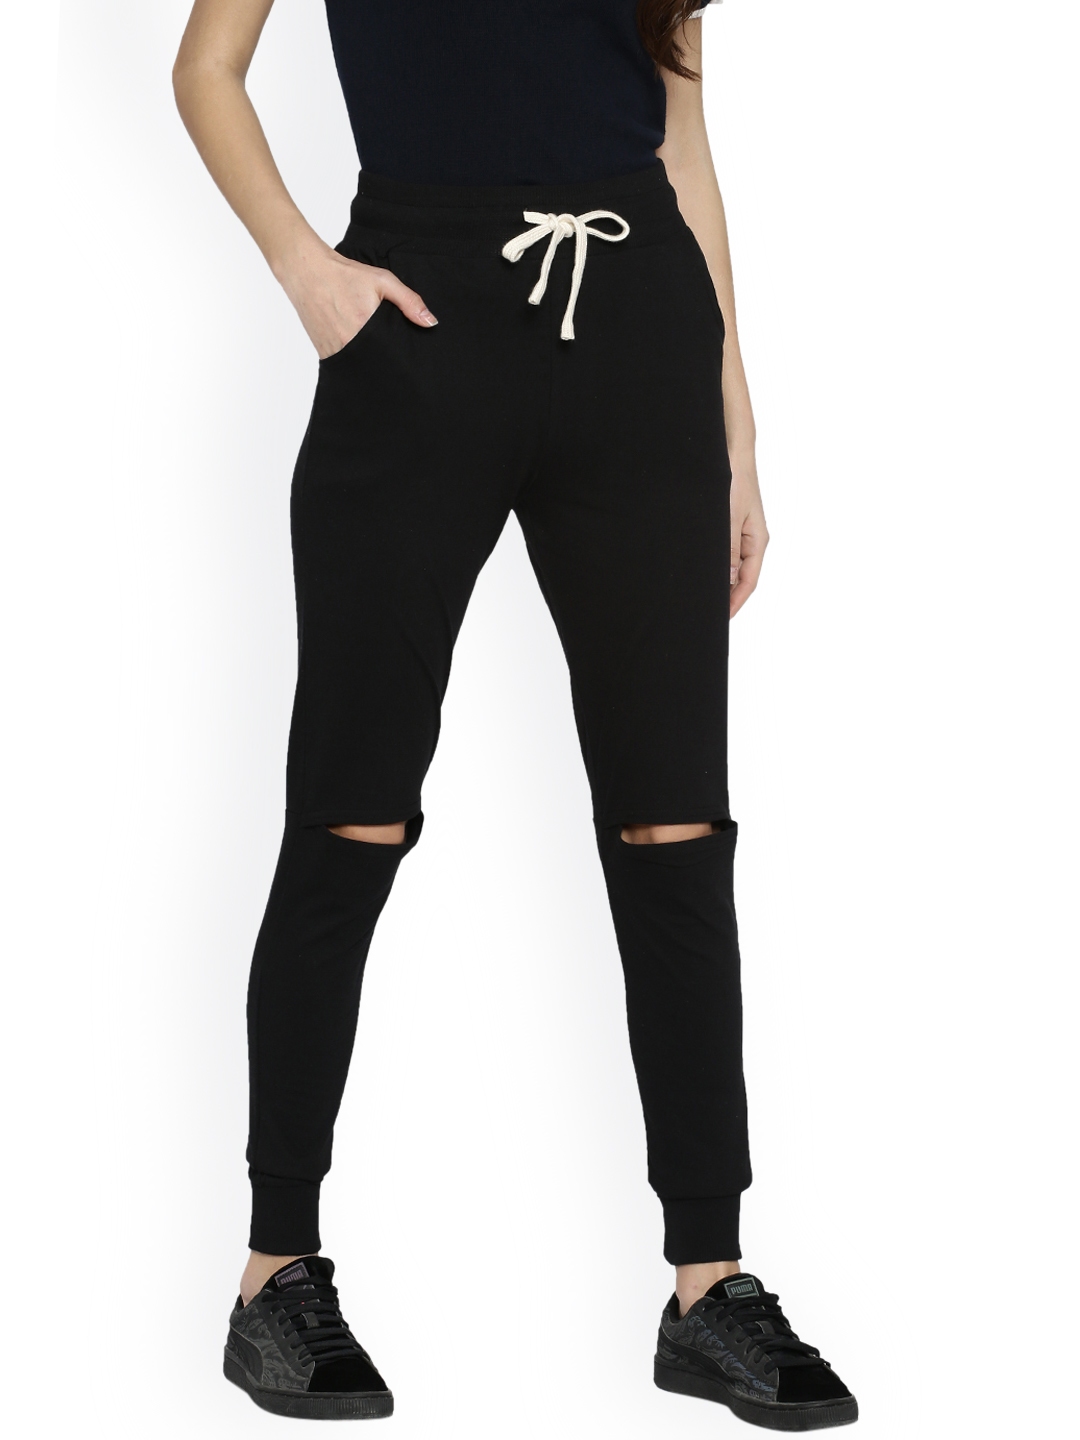 Buy Campus Sutra Black Ripped Joggers  Track Pants for Women 2529239   Myntra